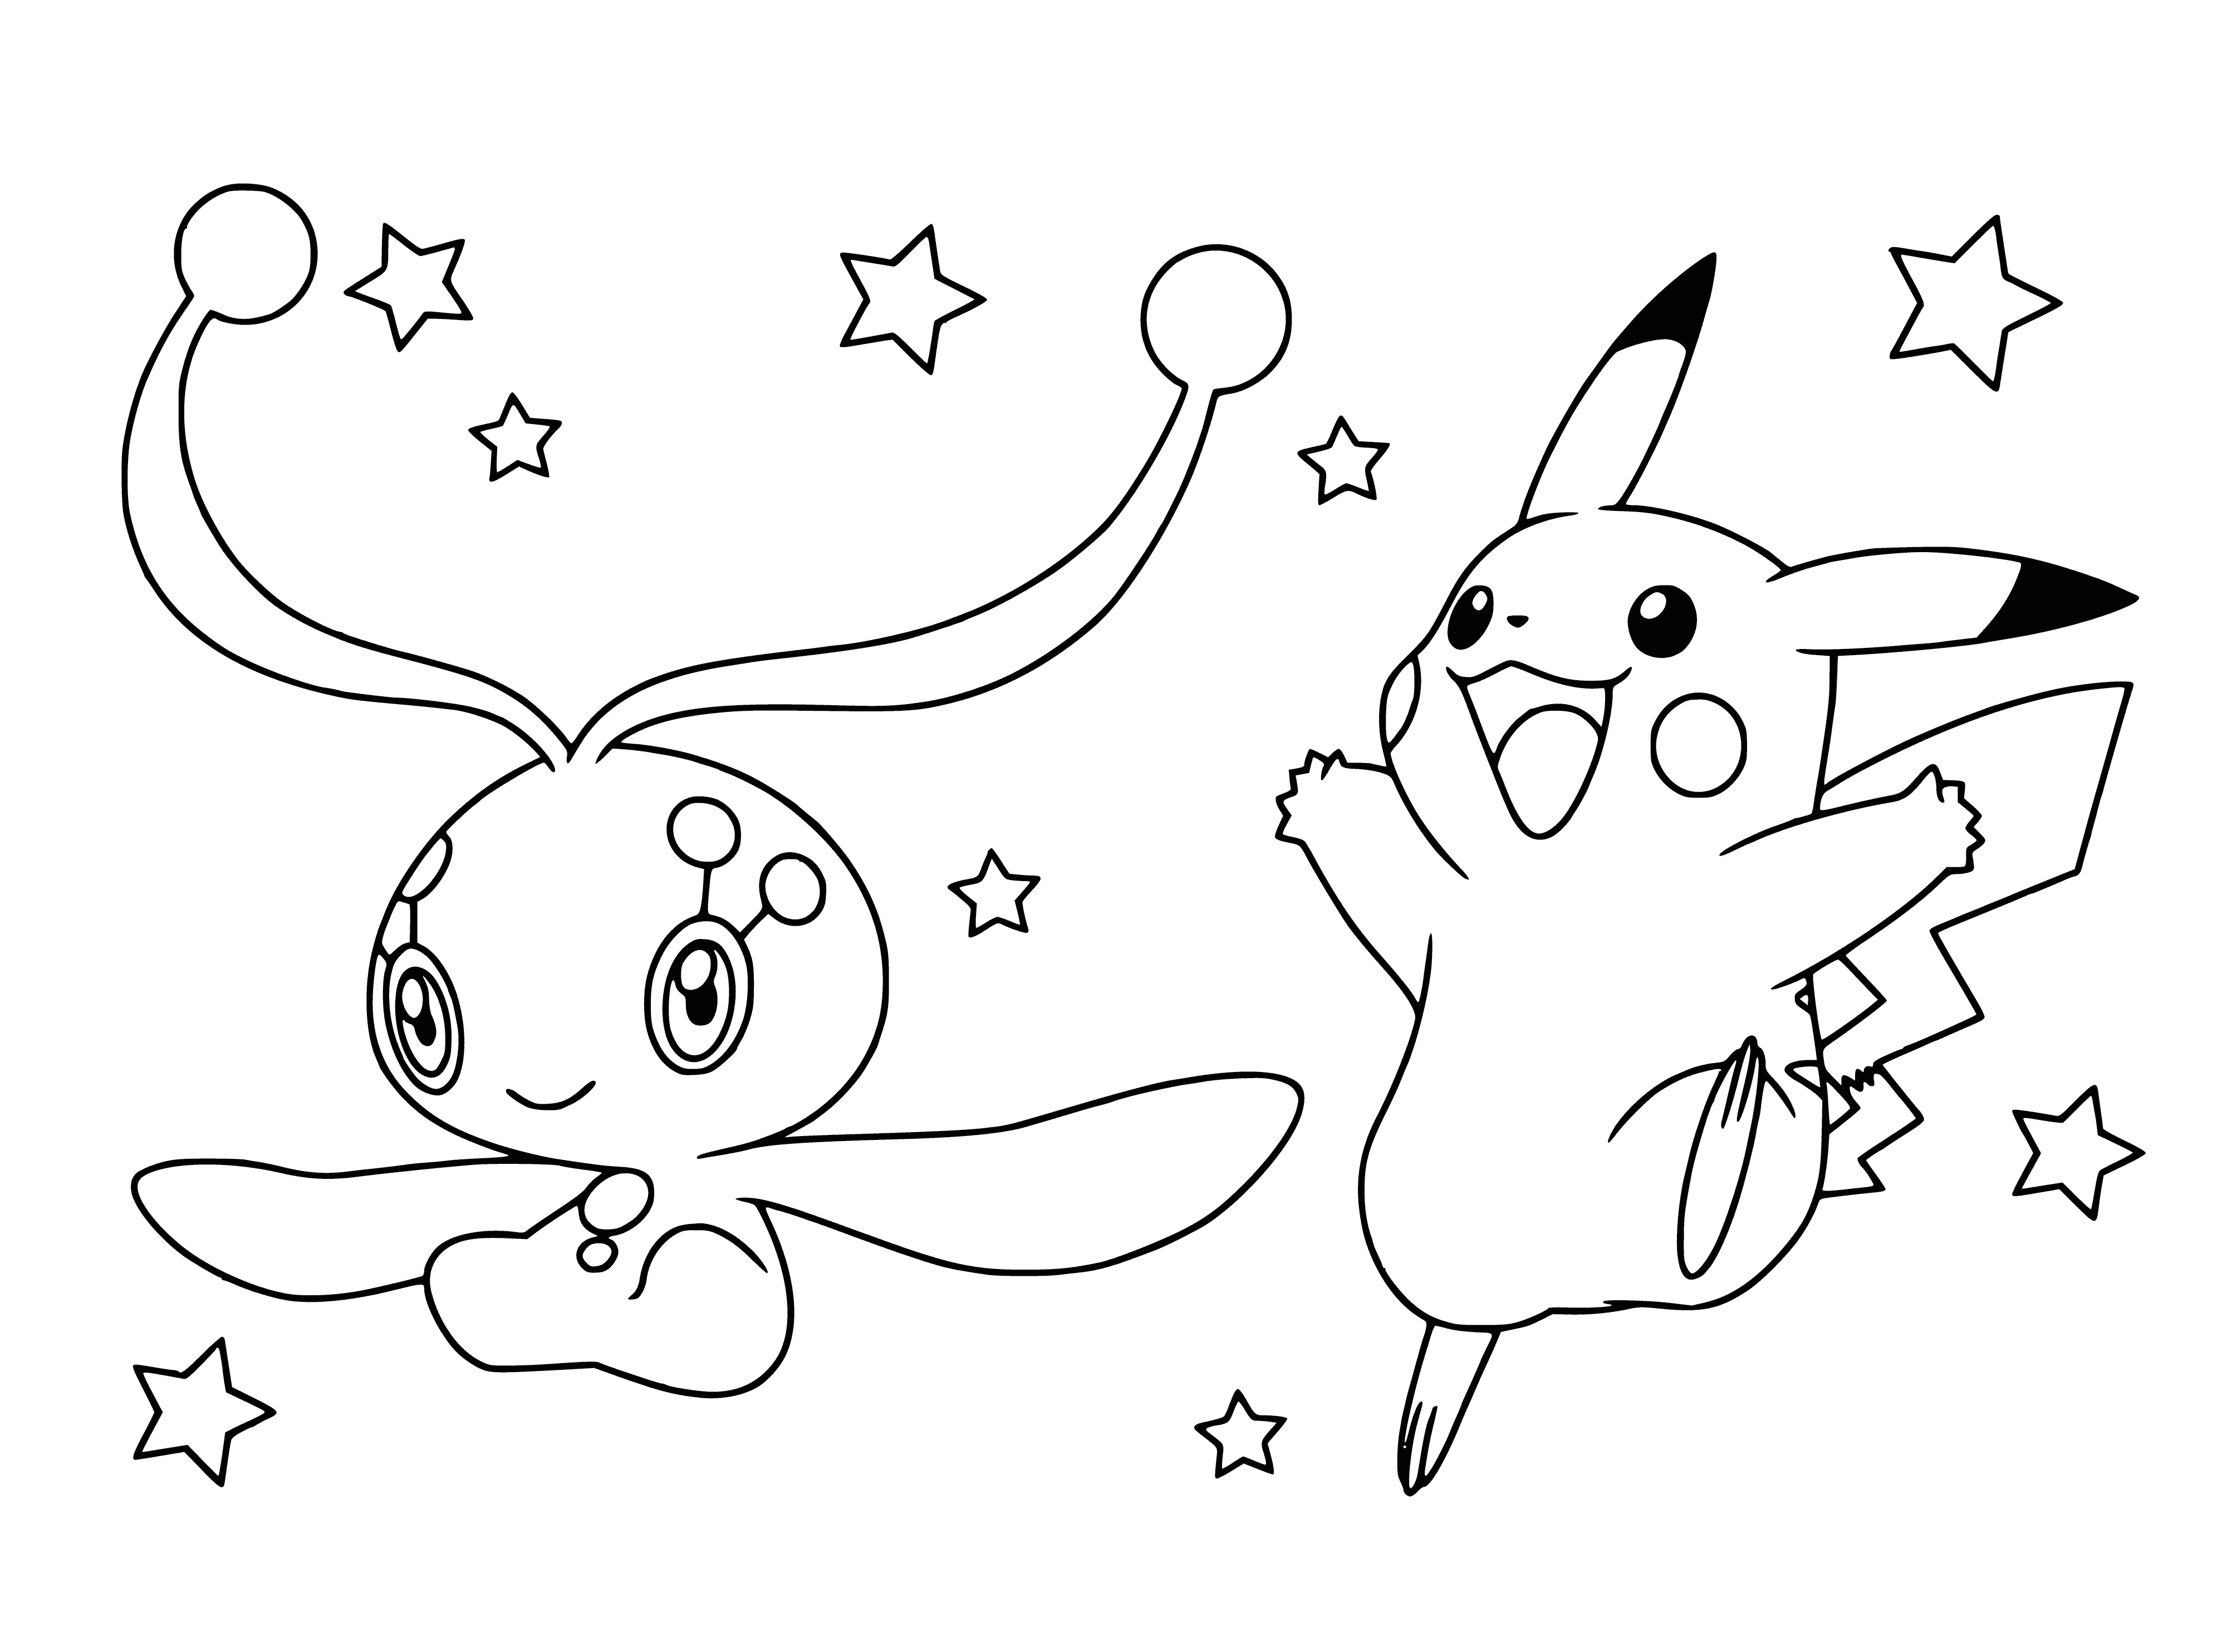 coloring page: A Pikachu is a small, rodent-like Pokémon w/brown fur & a lightning bolt-shaped tail. It can store electricity in its cheek pouches.